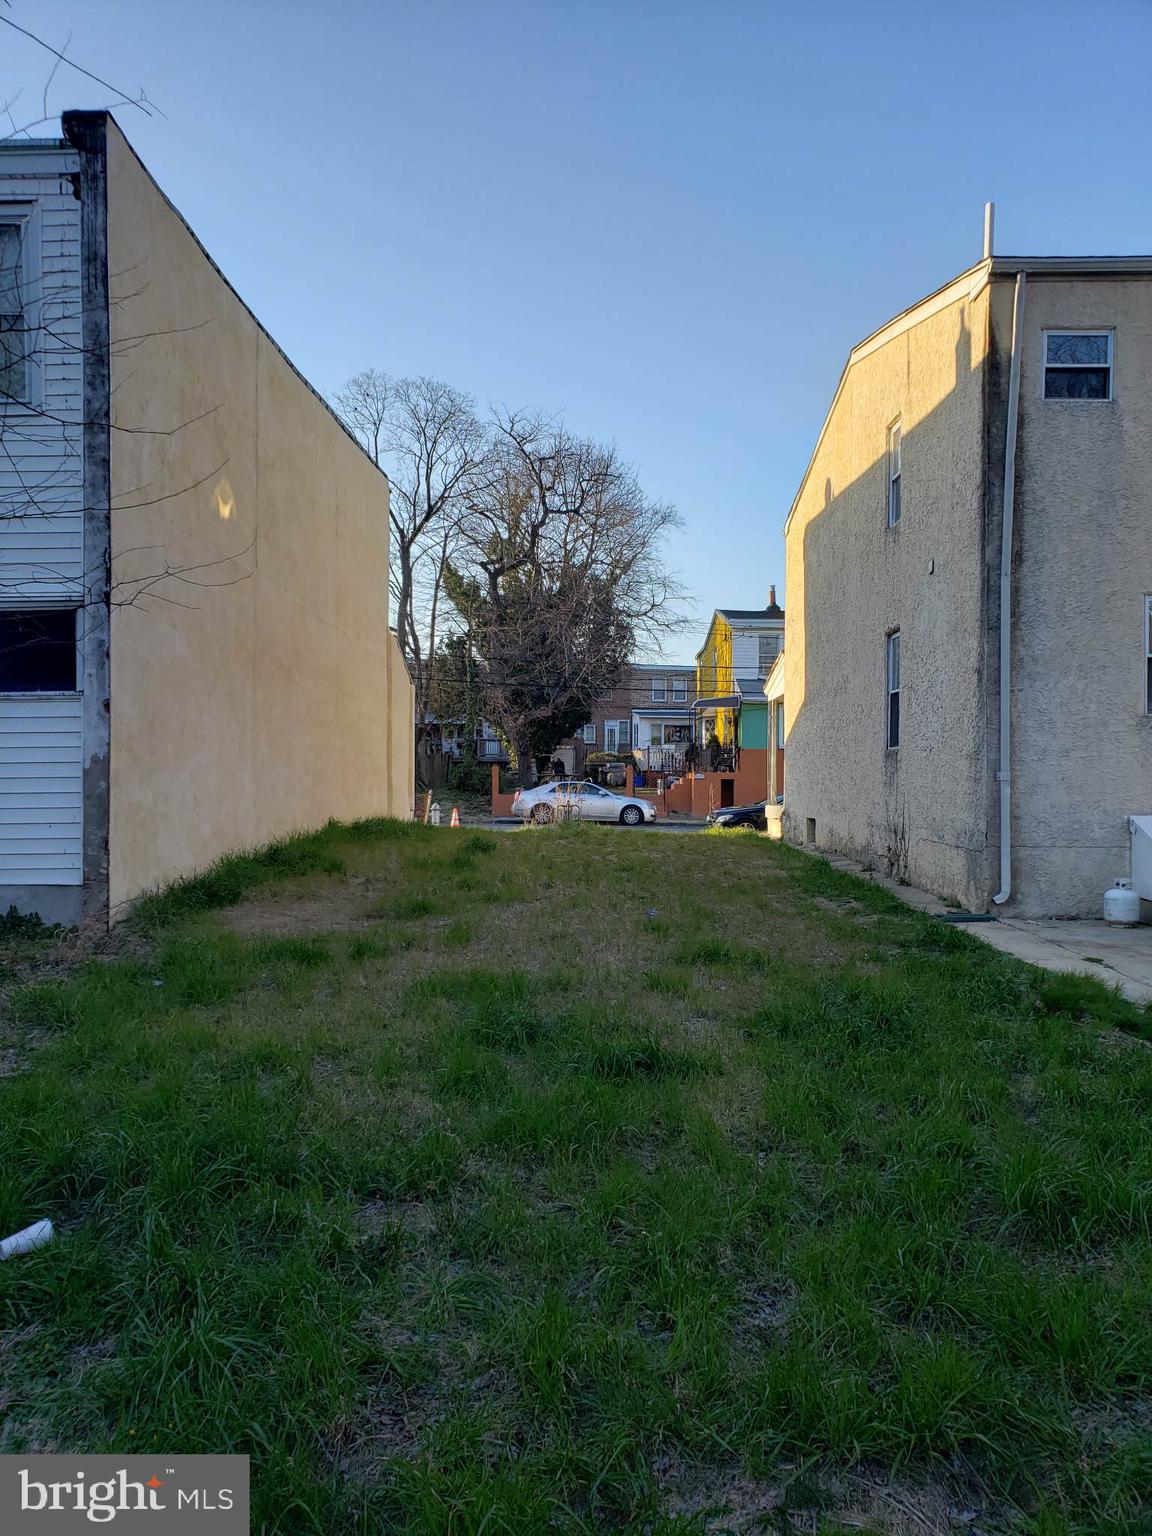 a view of a back yard of the house